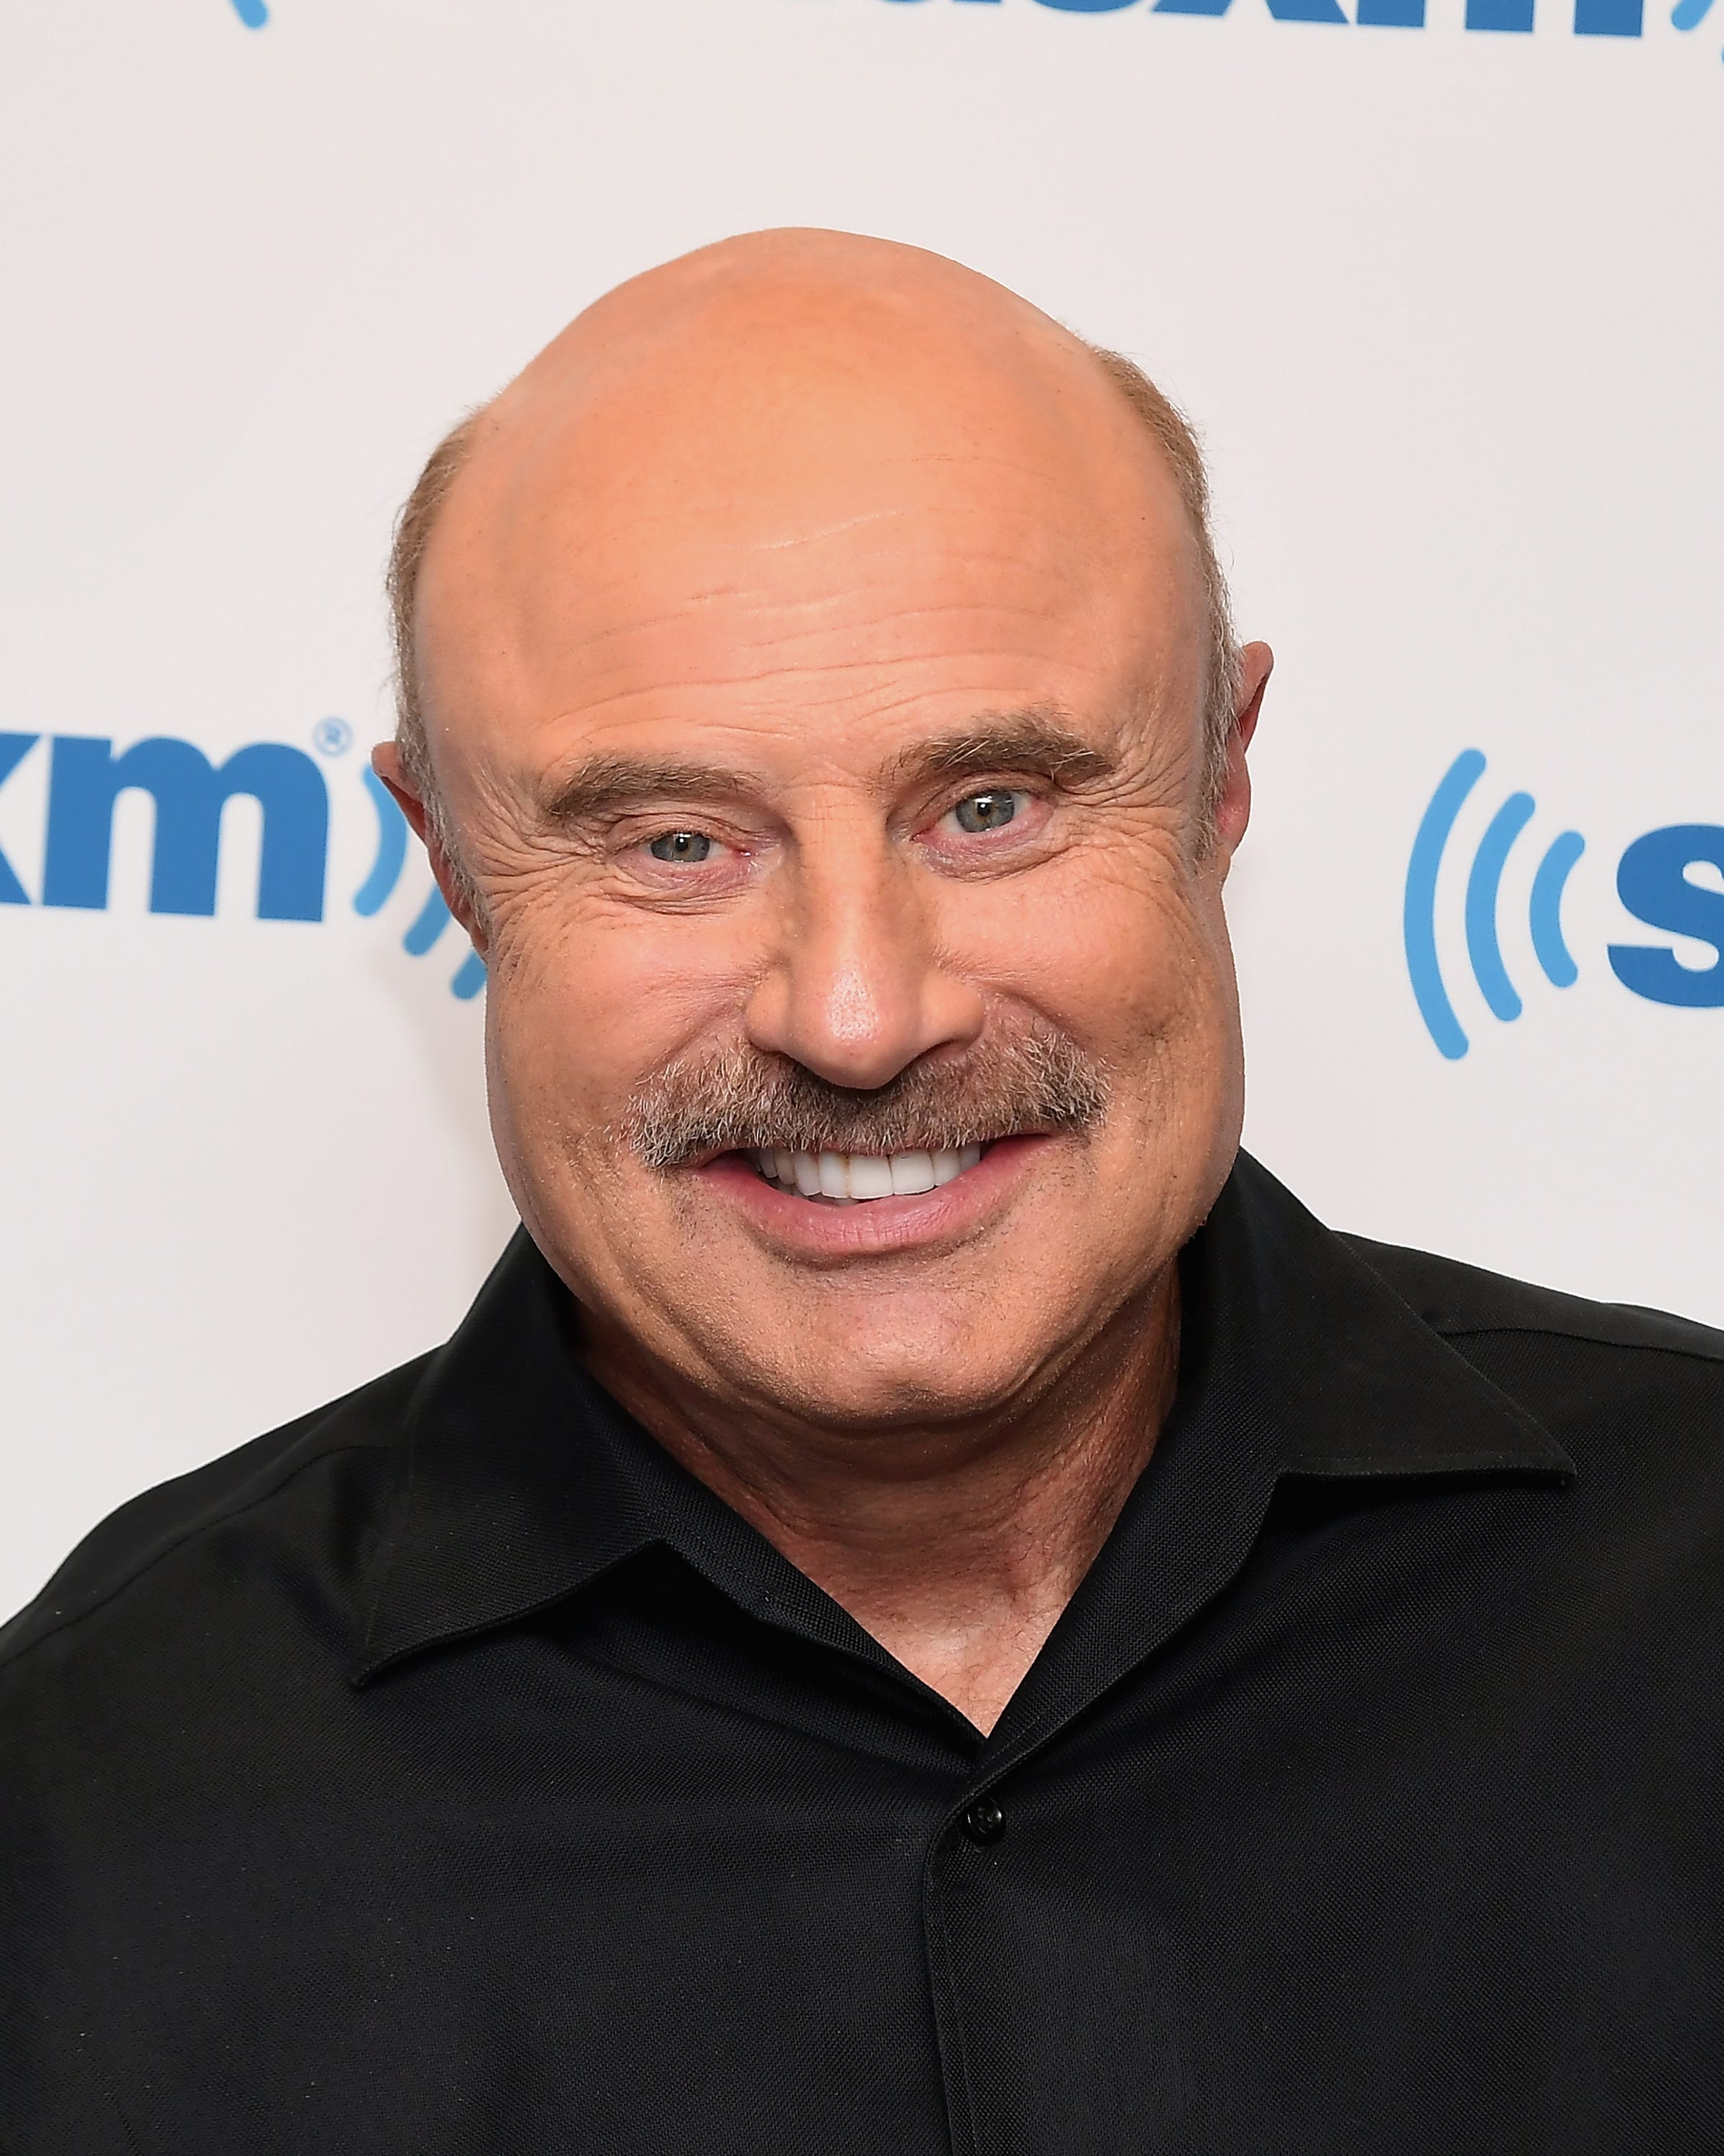 Dr. Phil announces end of daytime talk show after 21 seasons: 'I have been blessed'